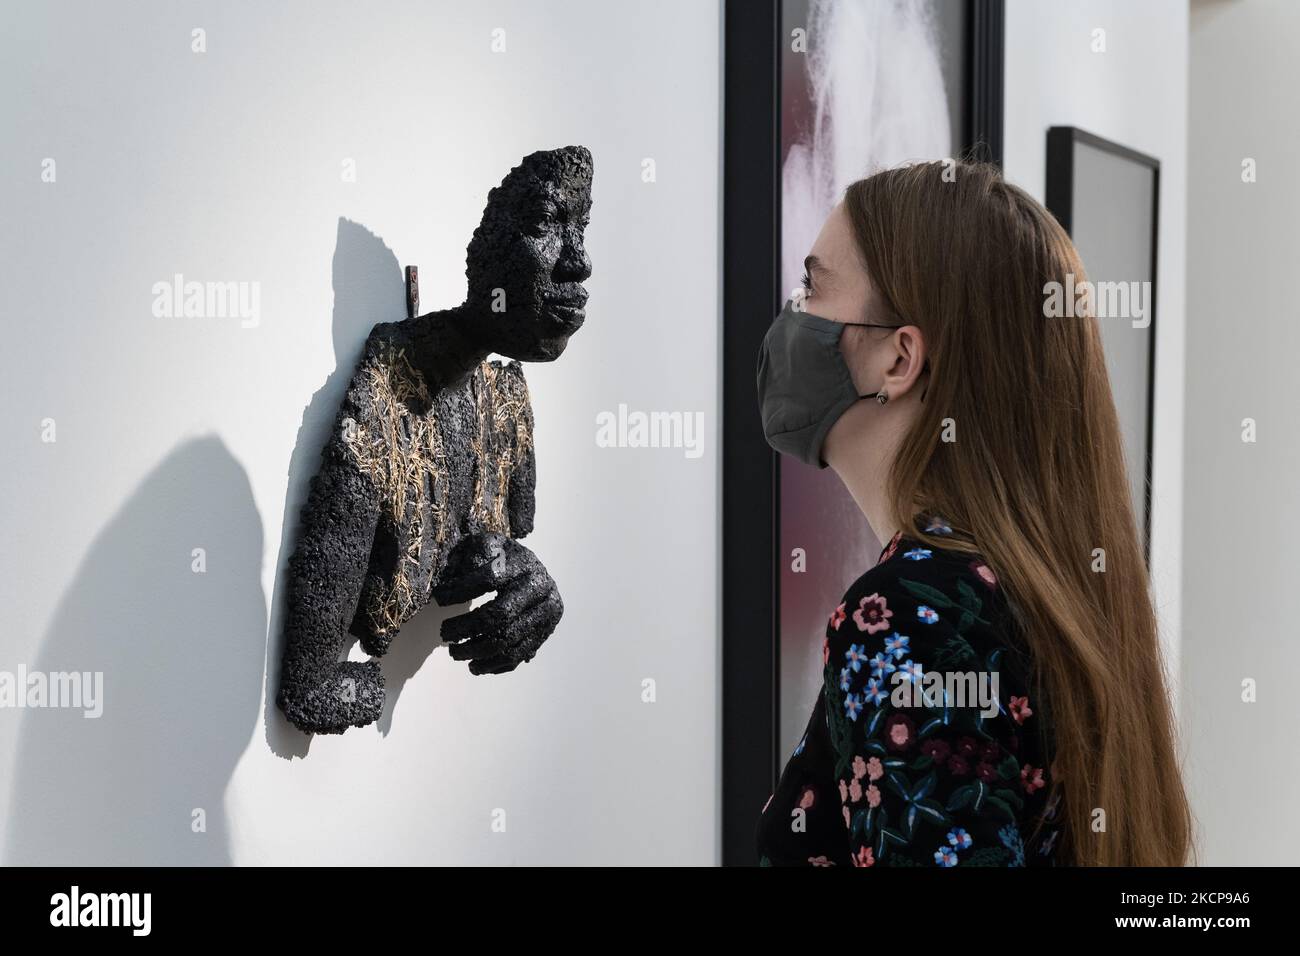 LONDON, UNITED KINGDOM - OCTOBER 08, 2021: A staff member looks at a sculpture 'Serenity' by Richard Atugonza (b. 1994), part of REDEFINING THE TREND – Histories in the Making curated exhibition, during a press preview of 20th/21st Century: Evening Sale at Christie's auction house on October 08, 2021 in London, England. (Photo by WIktor Szymanowicz/NurPhoto) Stock Photo